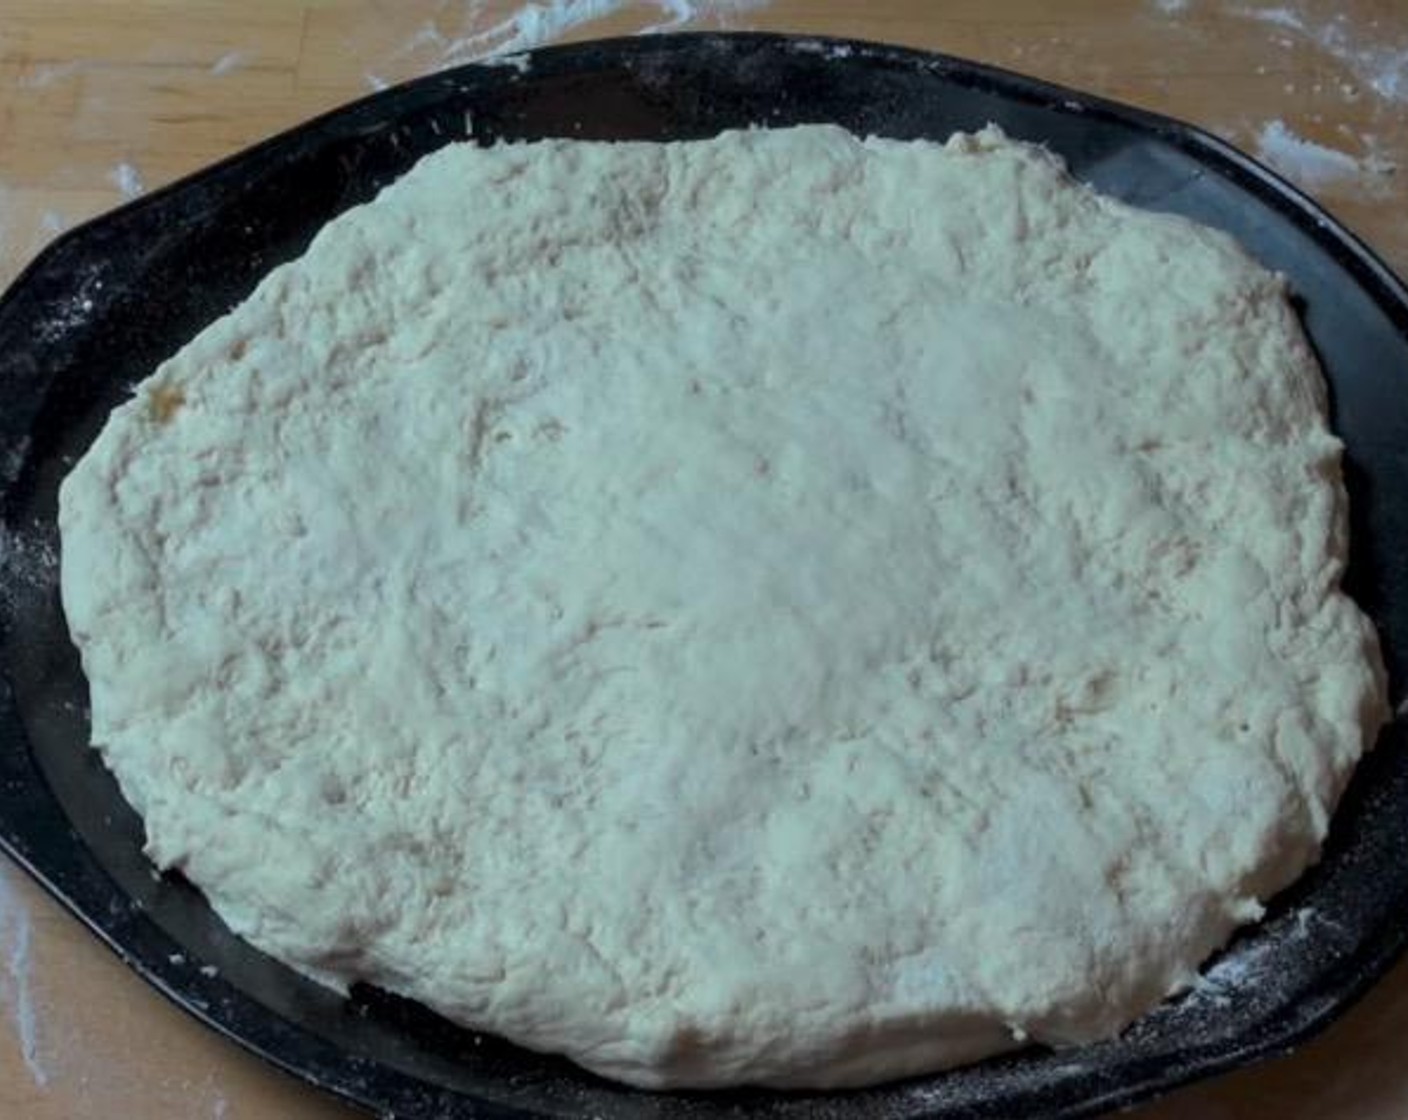 step 2 On a floured surface, knead the dough until smooth. Roll it out into a large, round shape. Transfer dough onto baking tray.